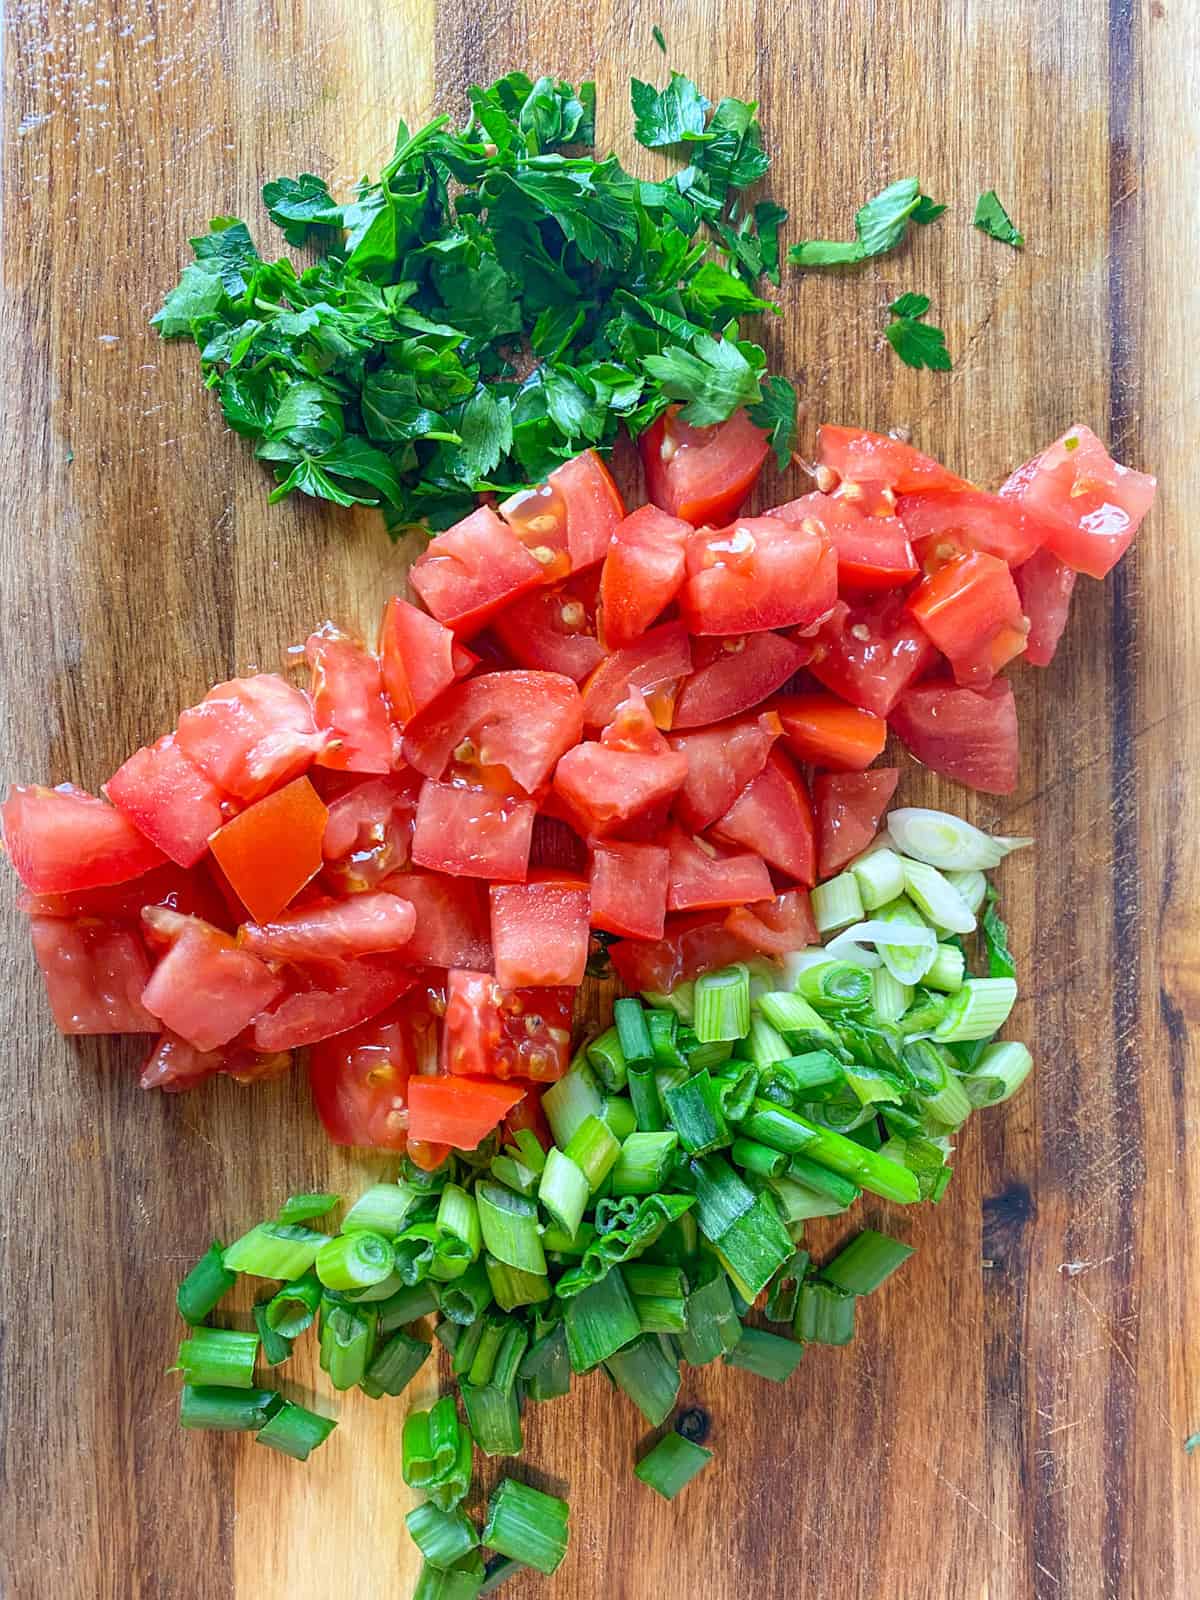 Chopped parsley, chopped tomatoes and sliced green onions on a wooden cutting board.